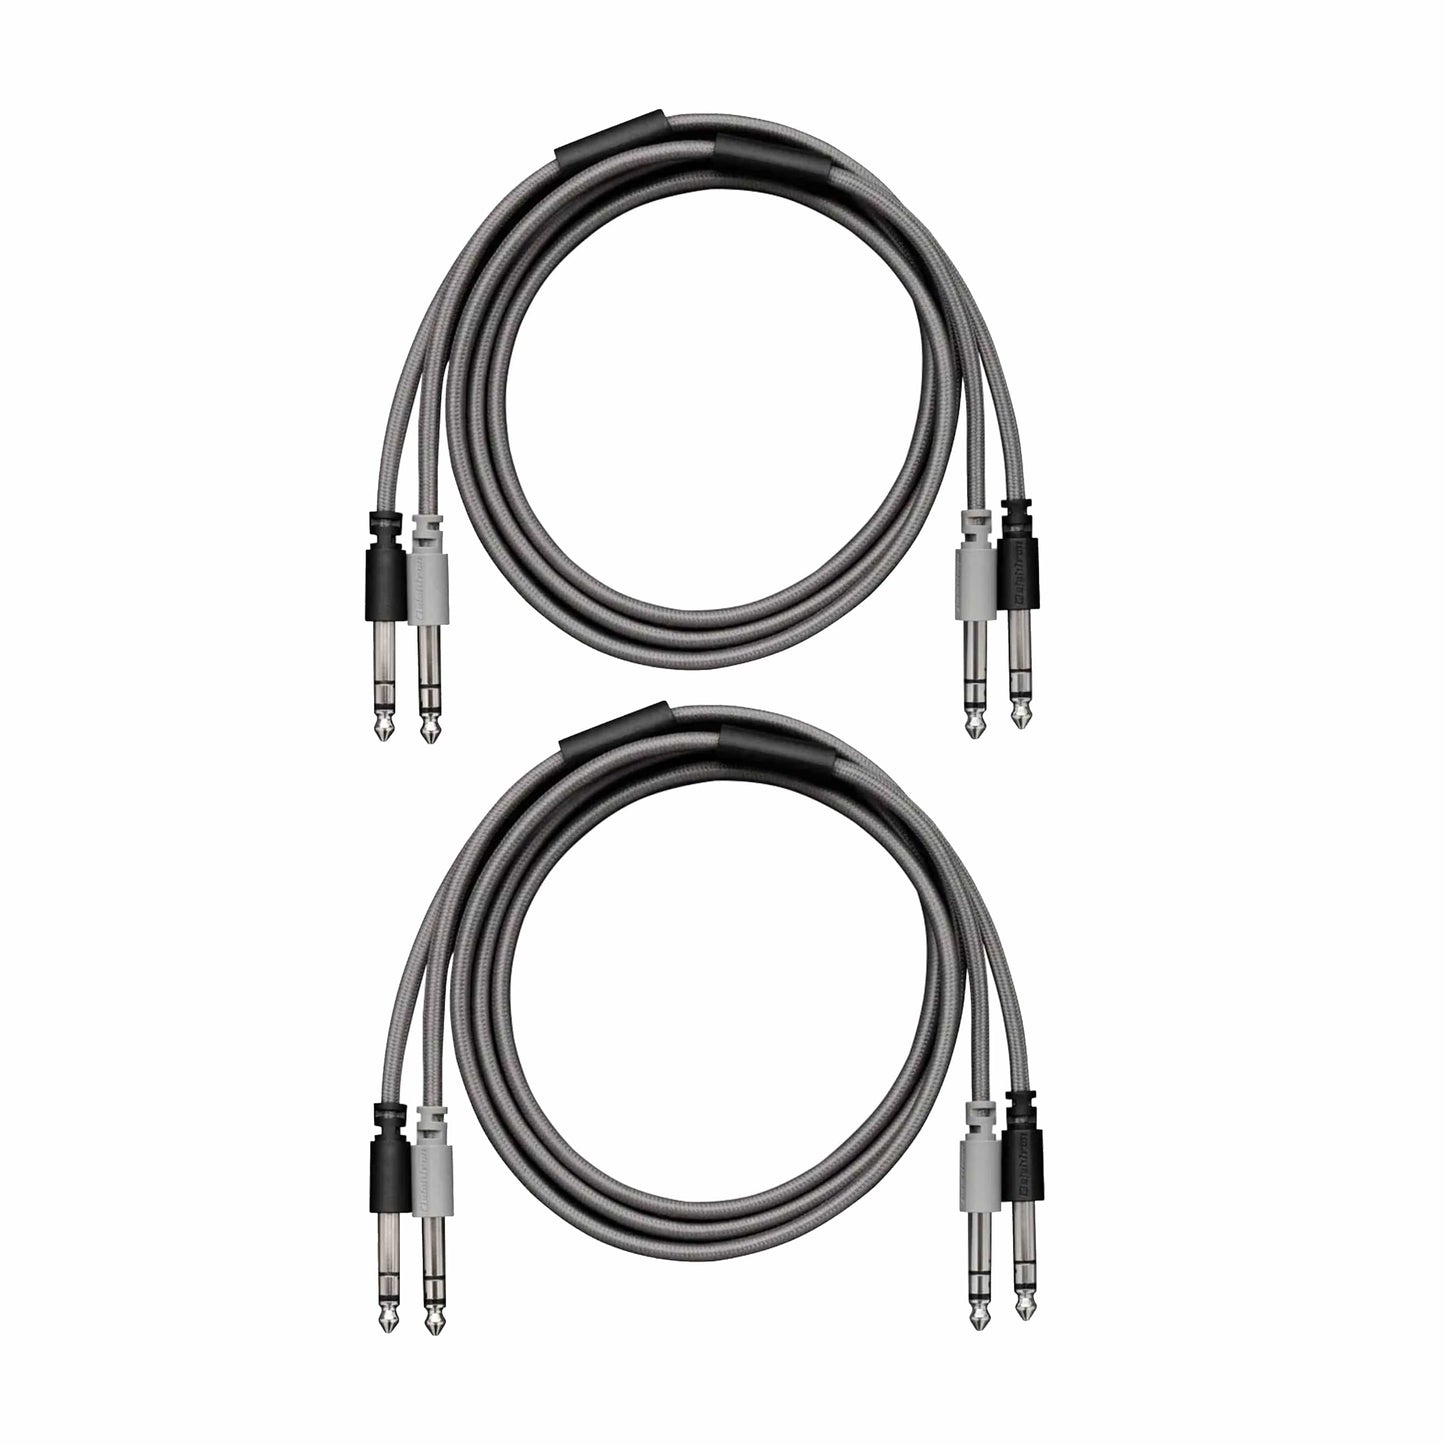 Elektron CA-45-TW Twin Balanced TRS 1/4" Cable 15' 2 Pack Bundle Accessories / Cables